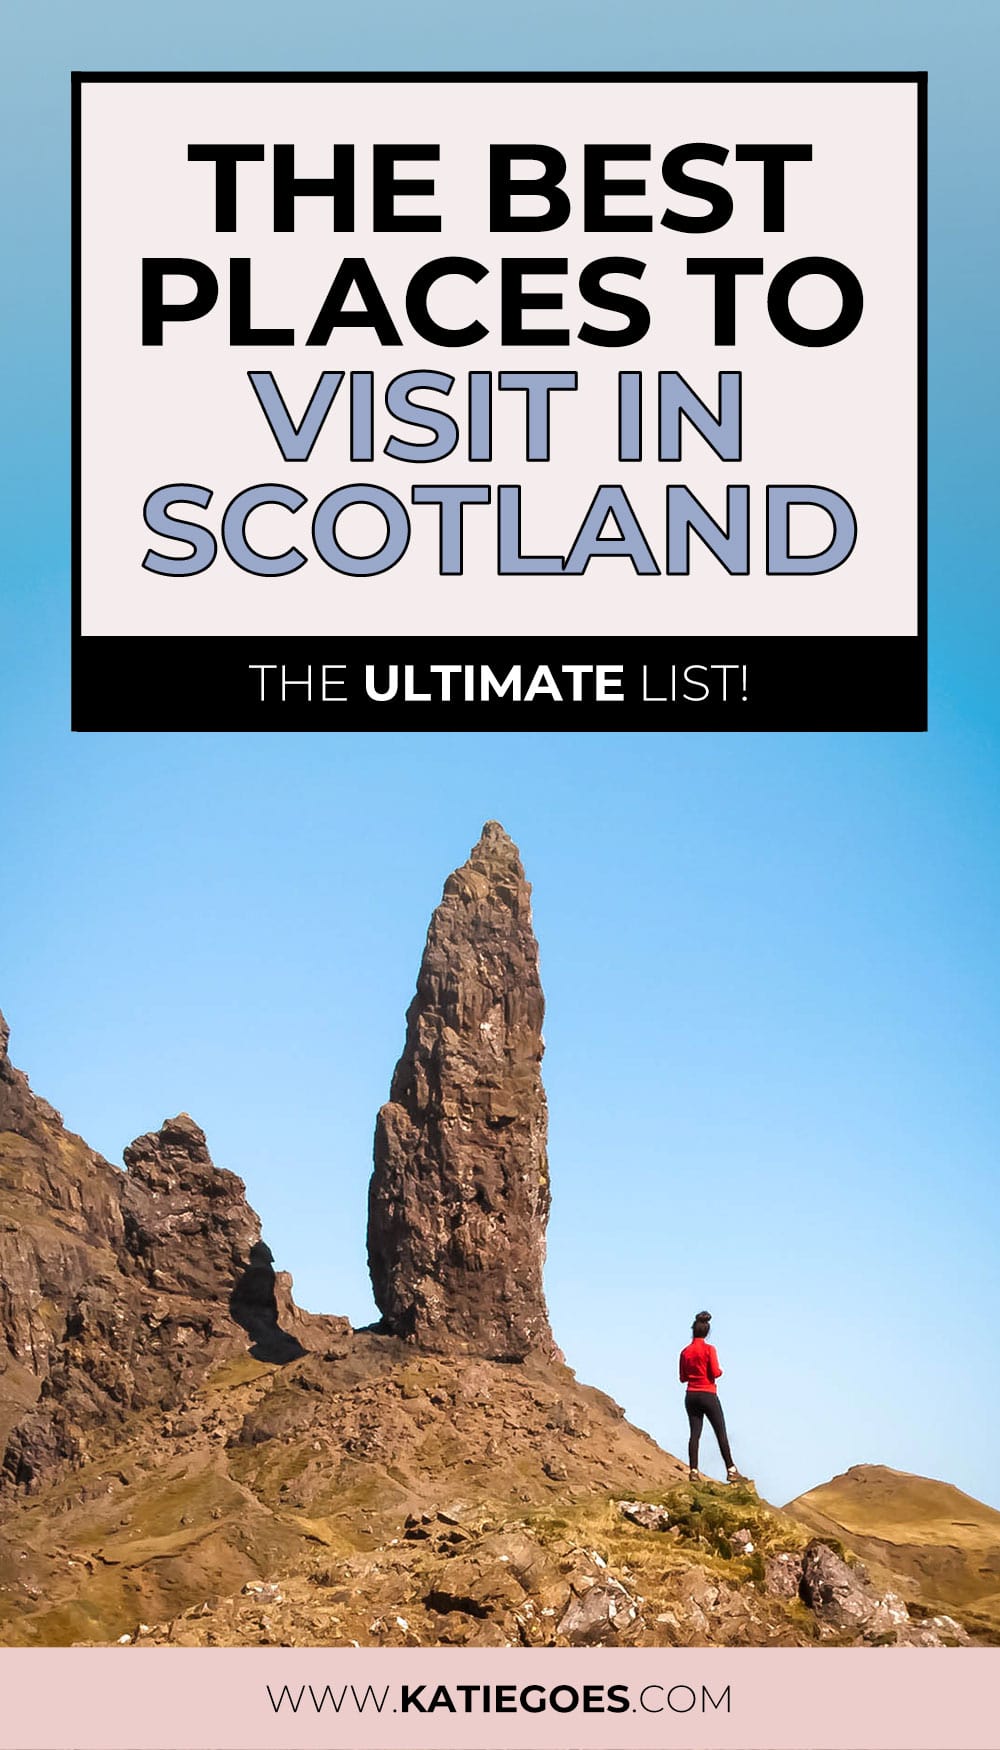 The Best Places to Visit in Scotland